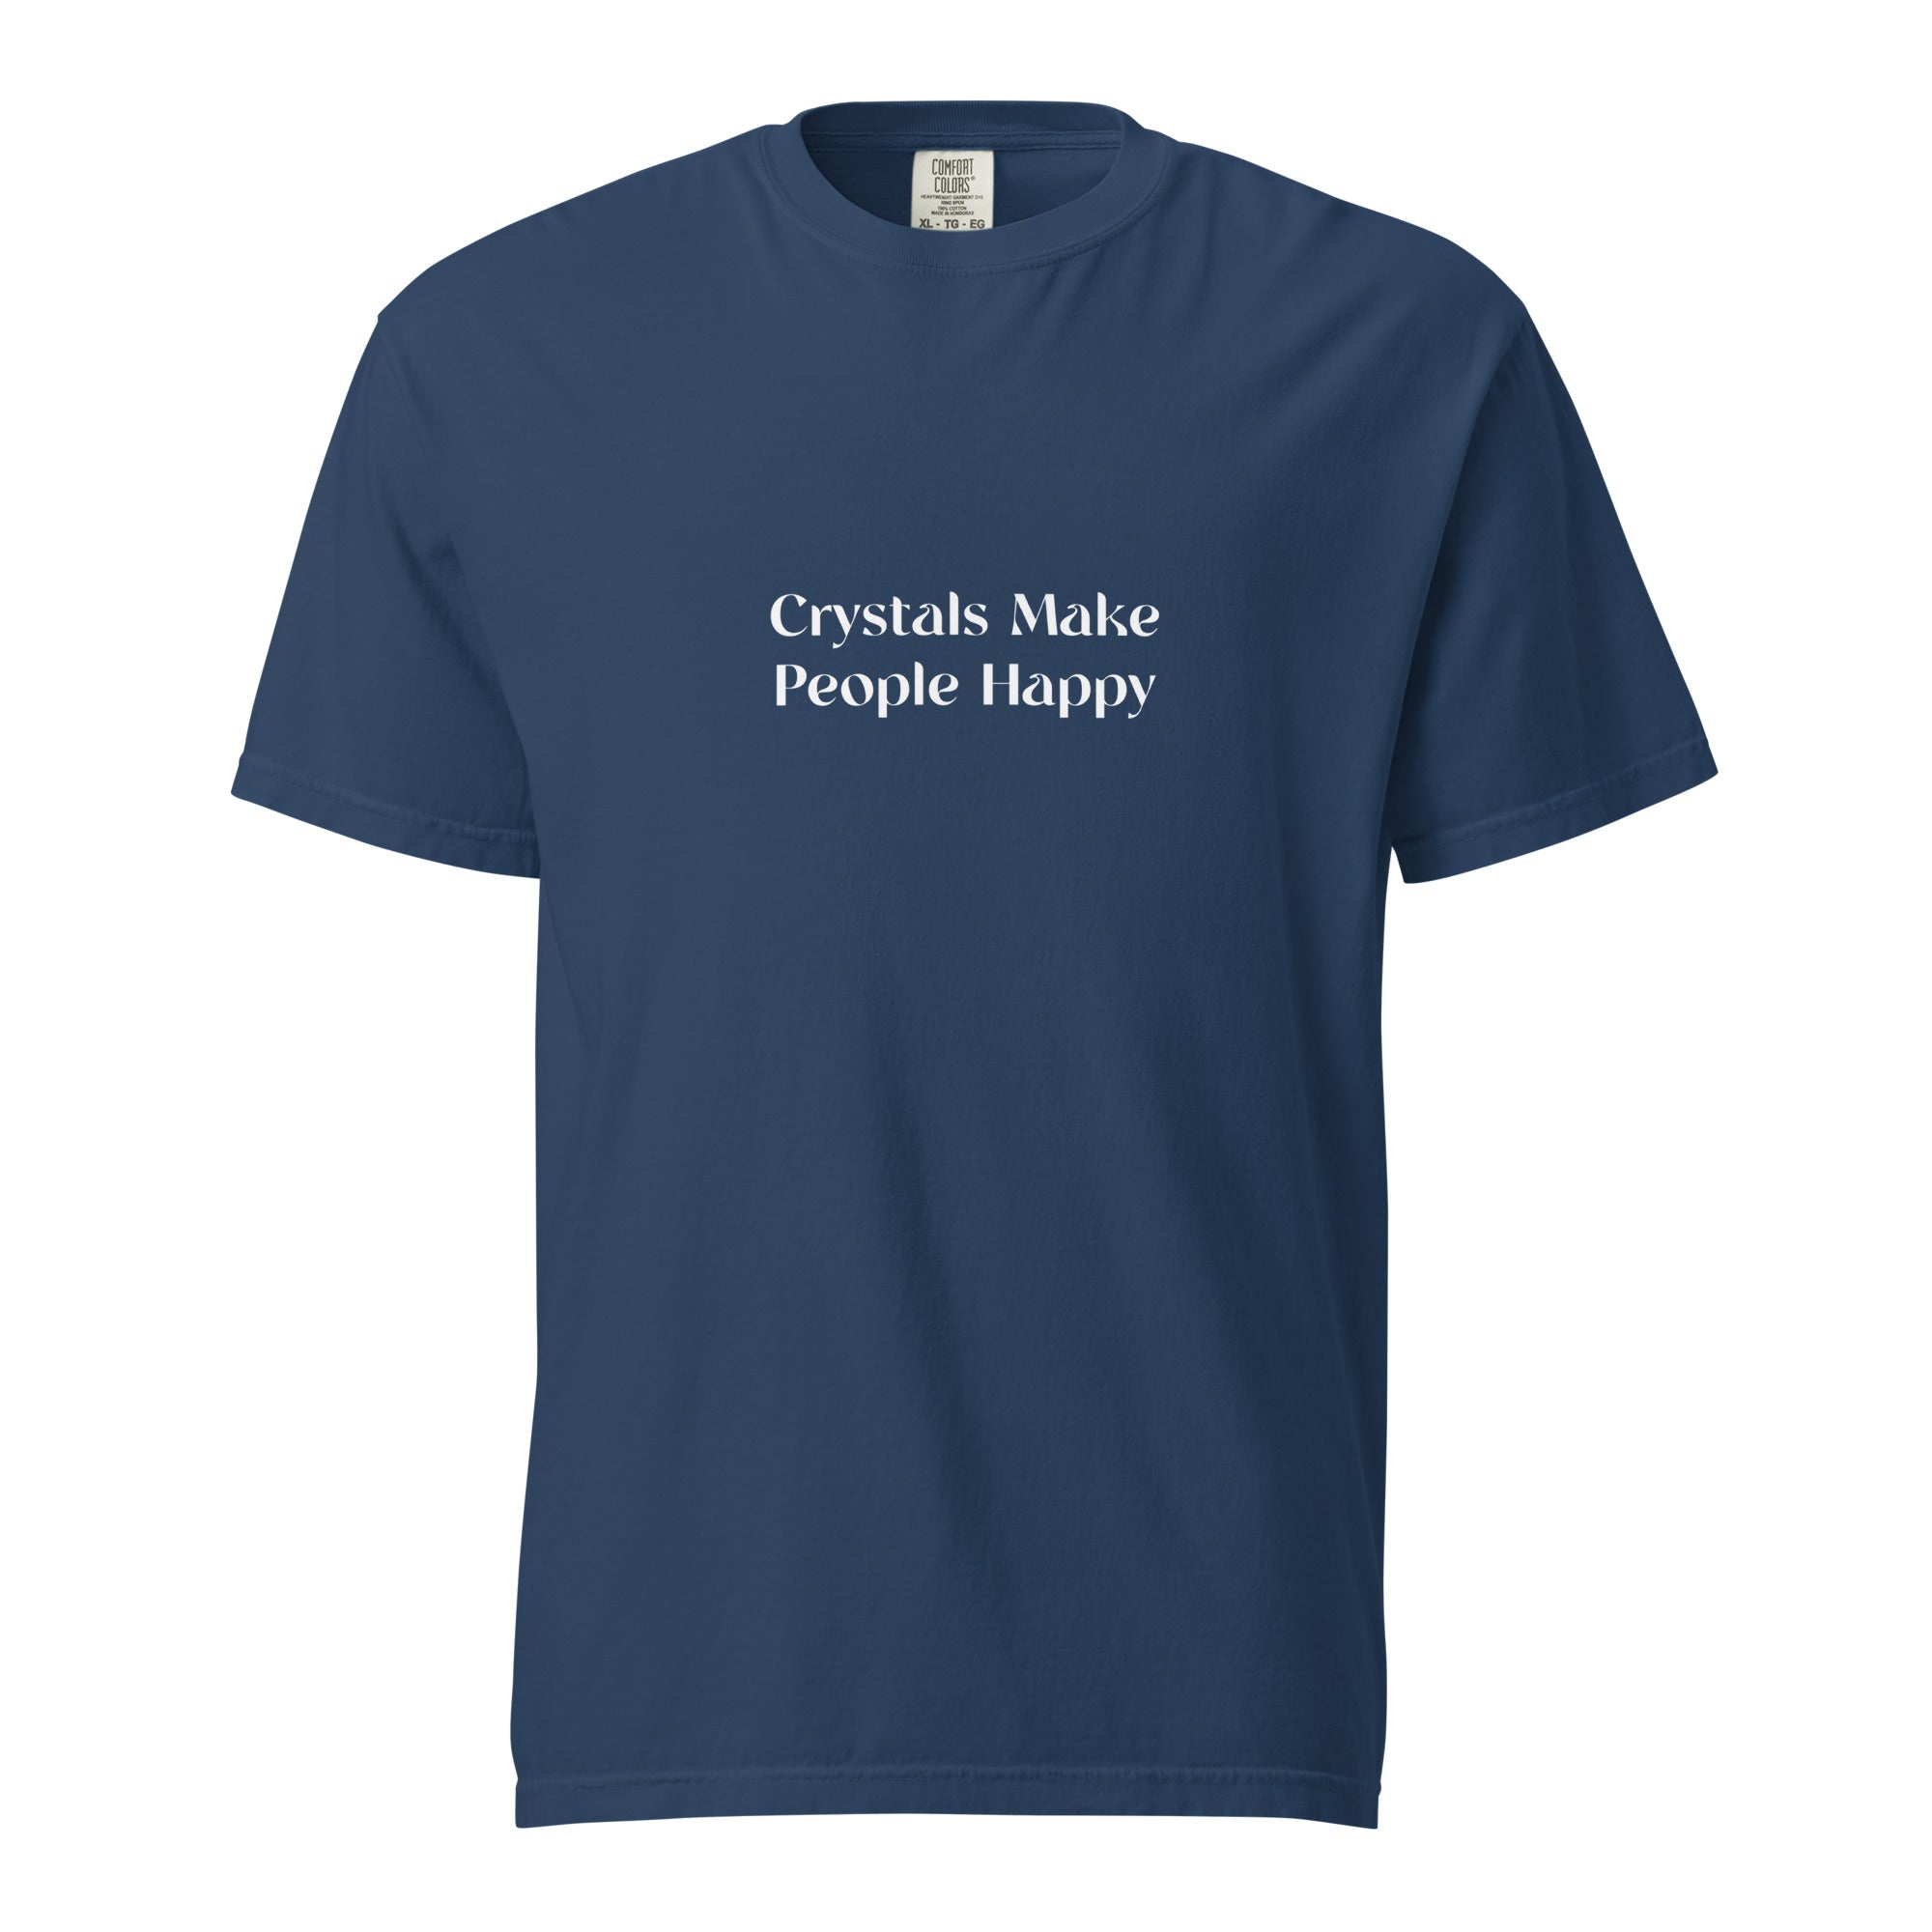 Crystals Make People Happy T-Shirt (White Print)